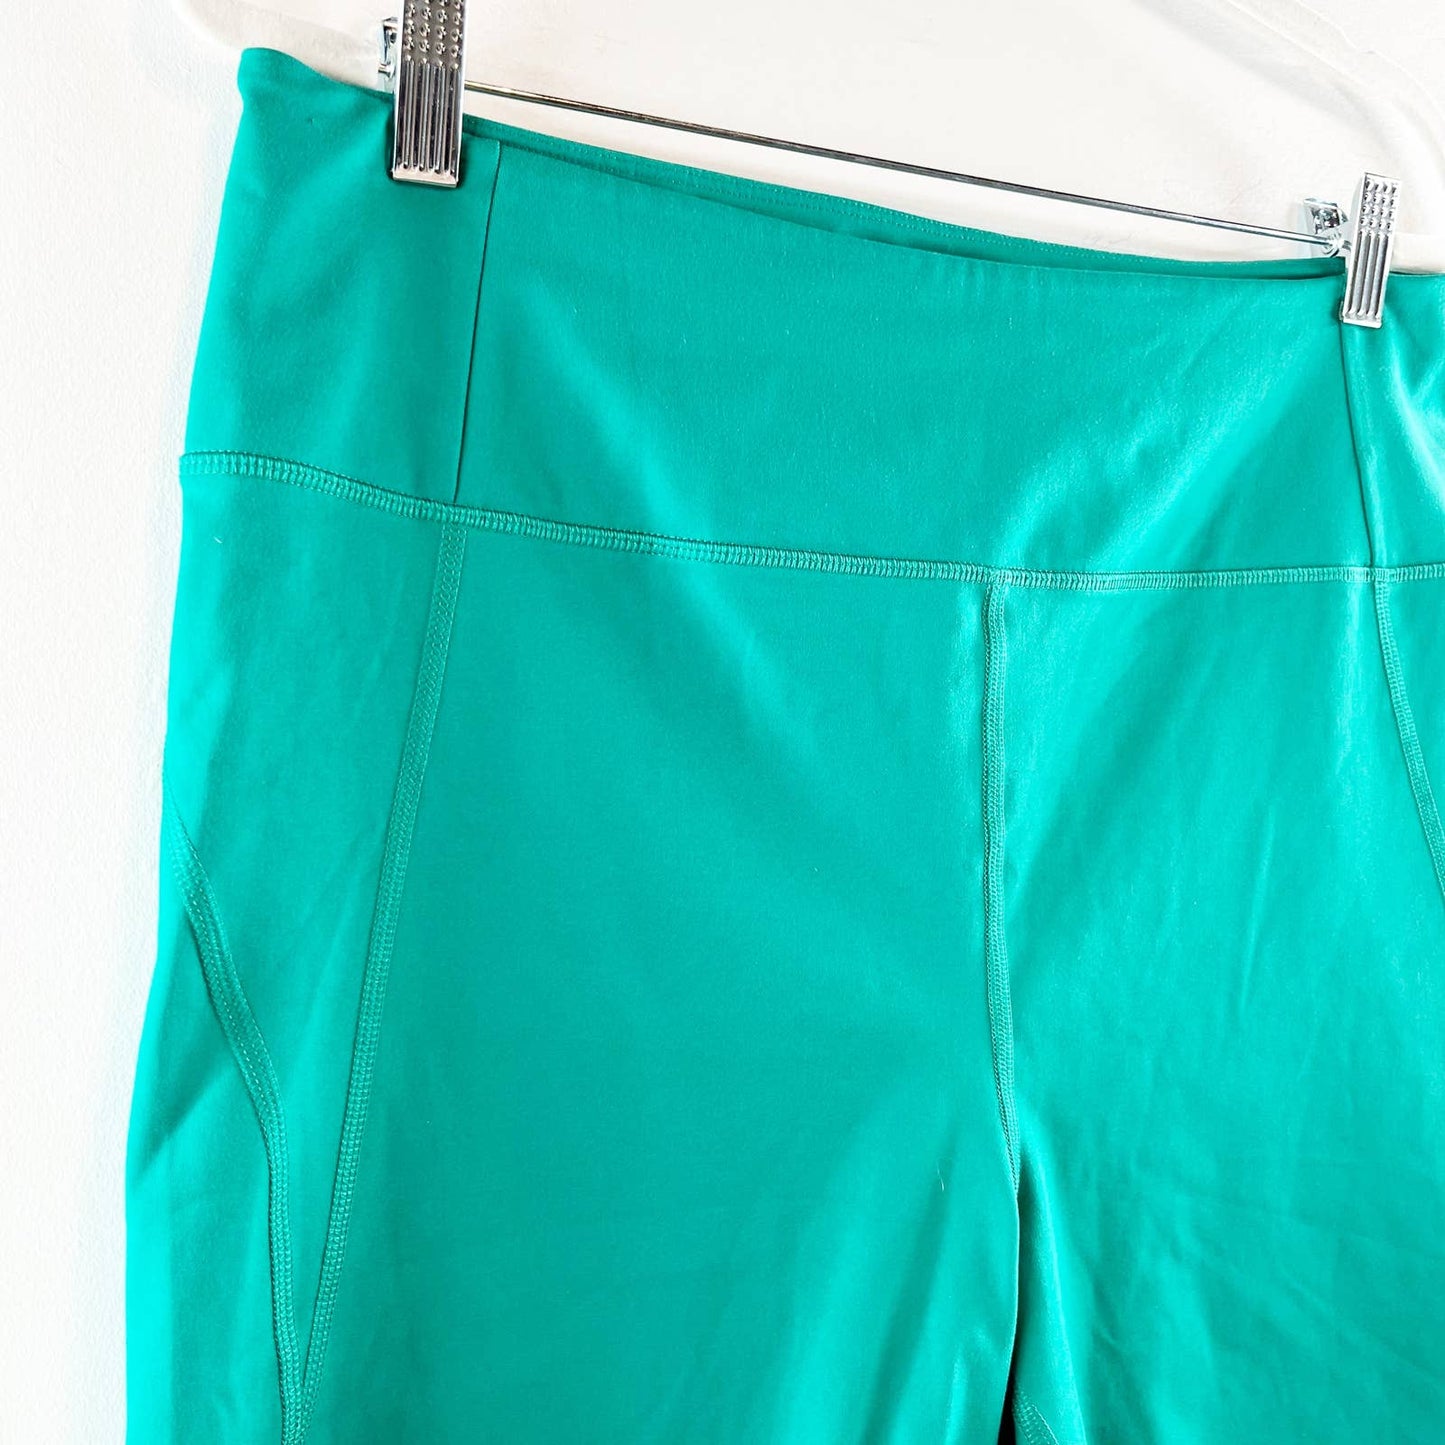 Girlfriend Collective Run Compressive Stretch Recycled-Jersey Shorts Green 3XL